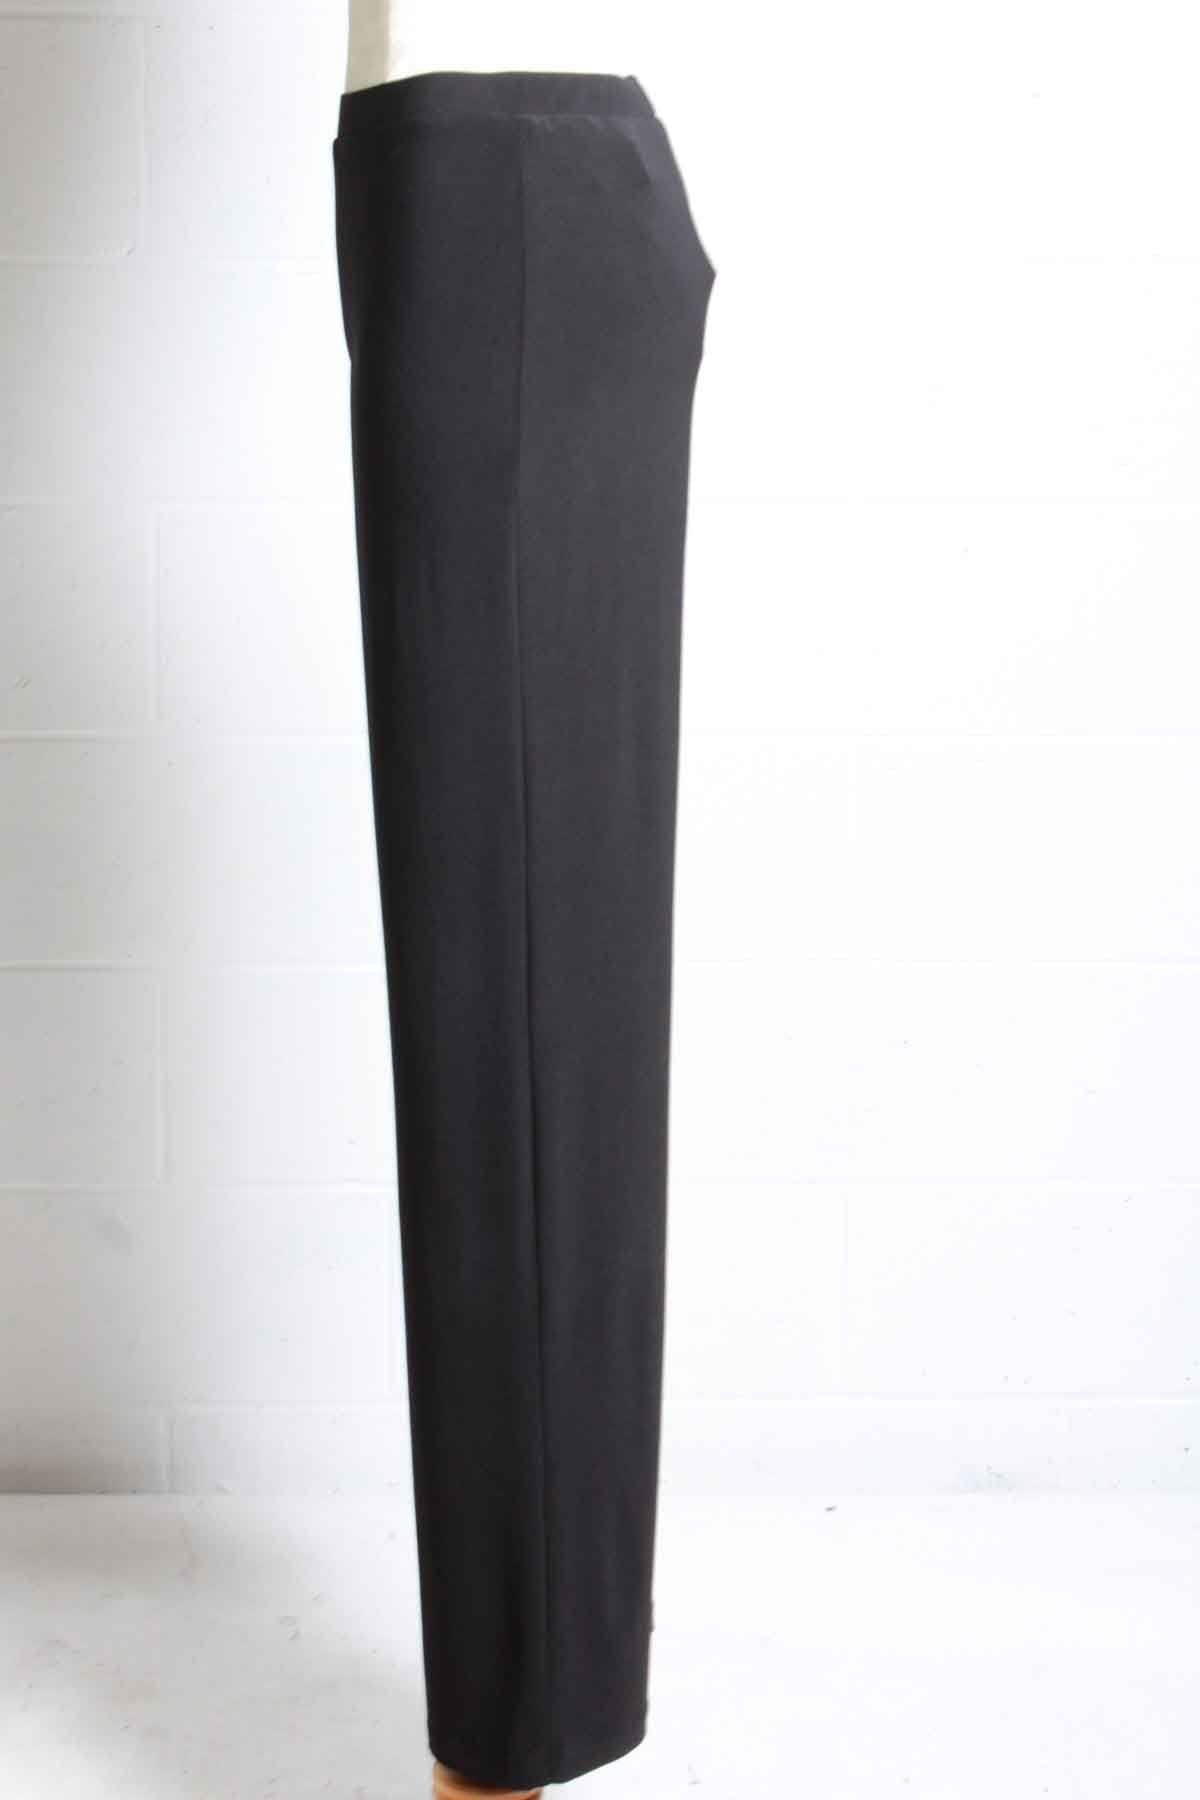 side view of Black Flowy Knit Pull On Pant by Frank Lyman